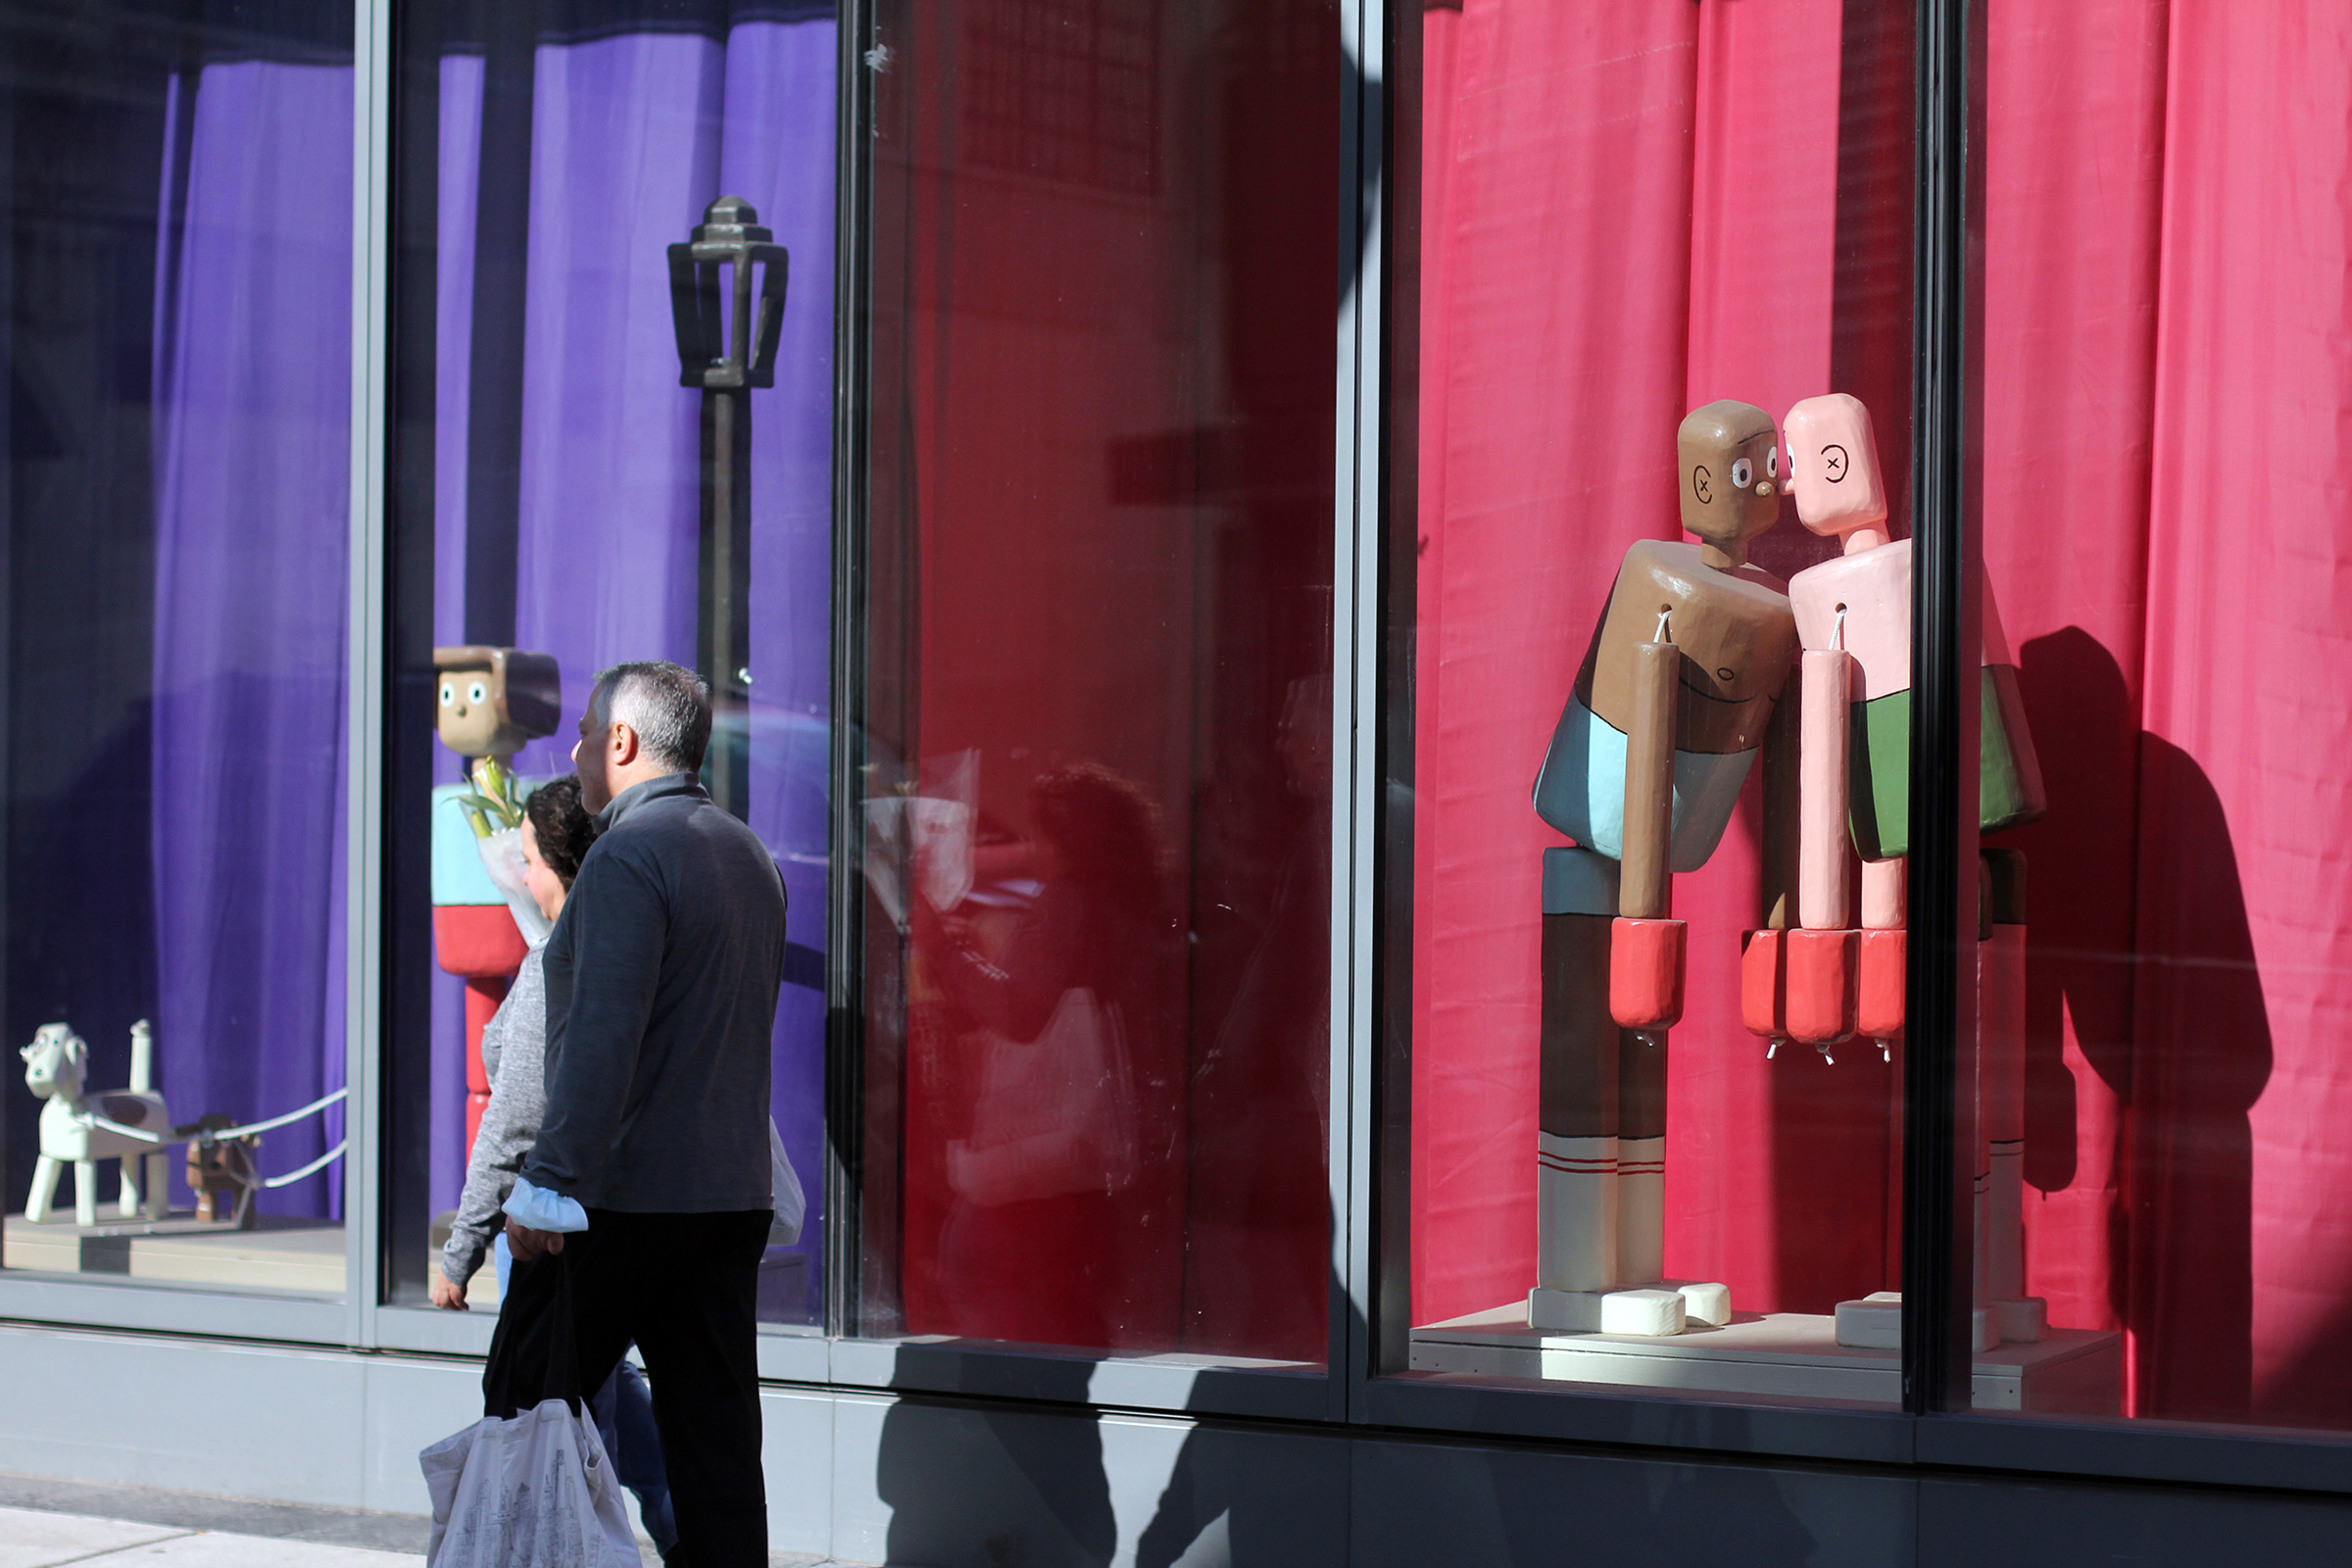 A photograph of two people walking past a window display featuring multiple life-size, wooden sculptures that look like push puppet toys.